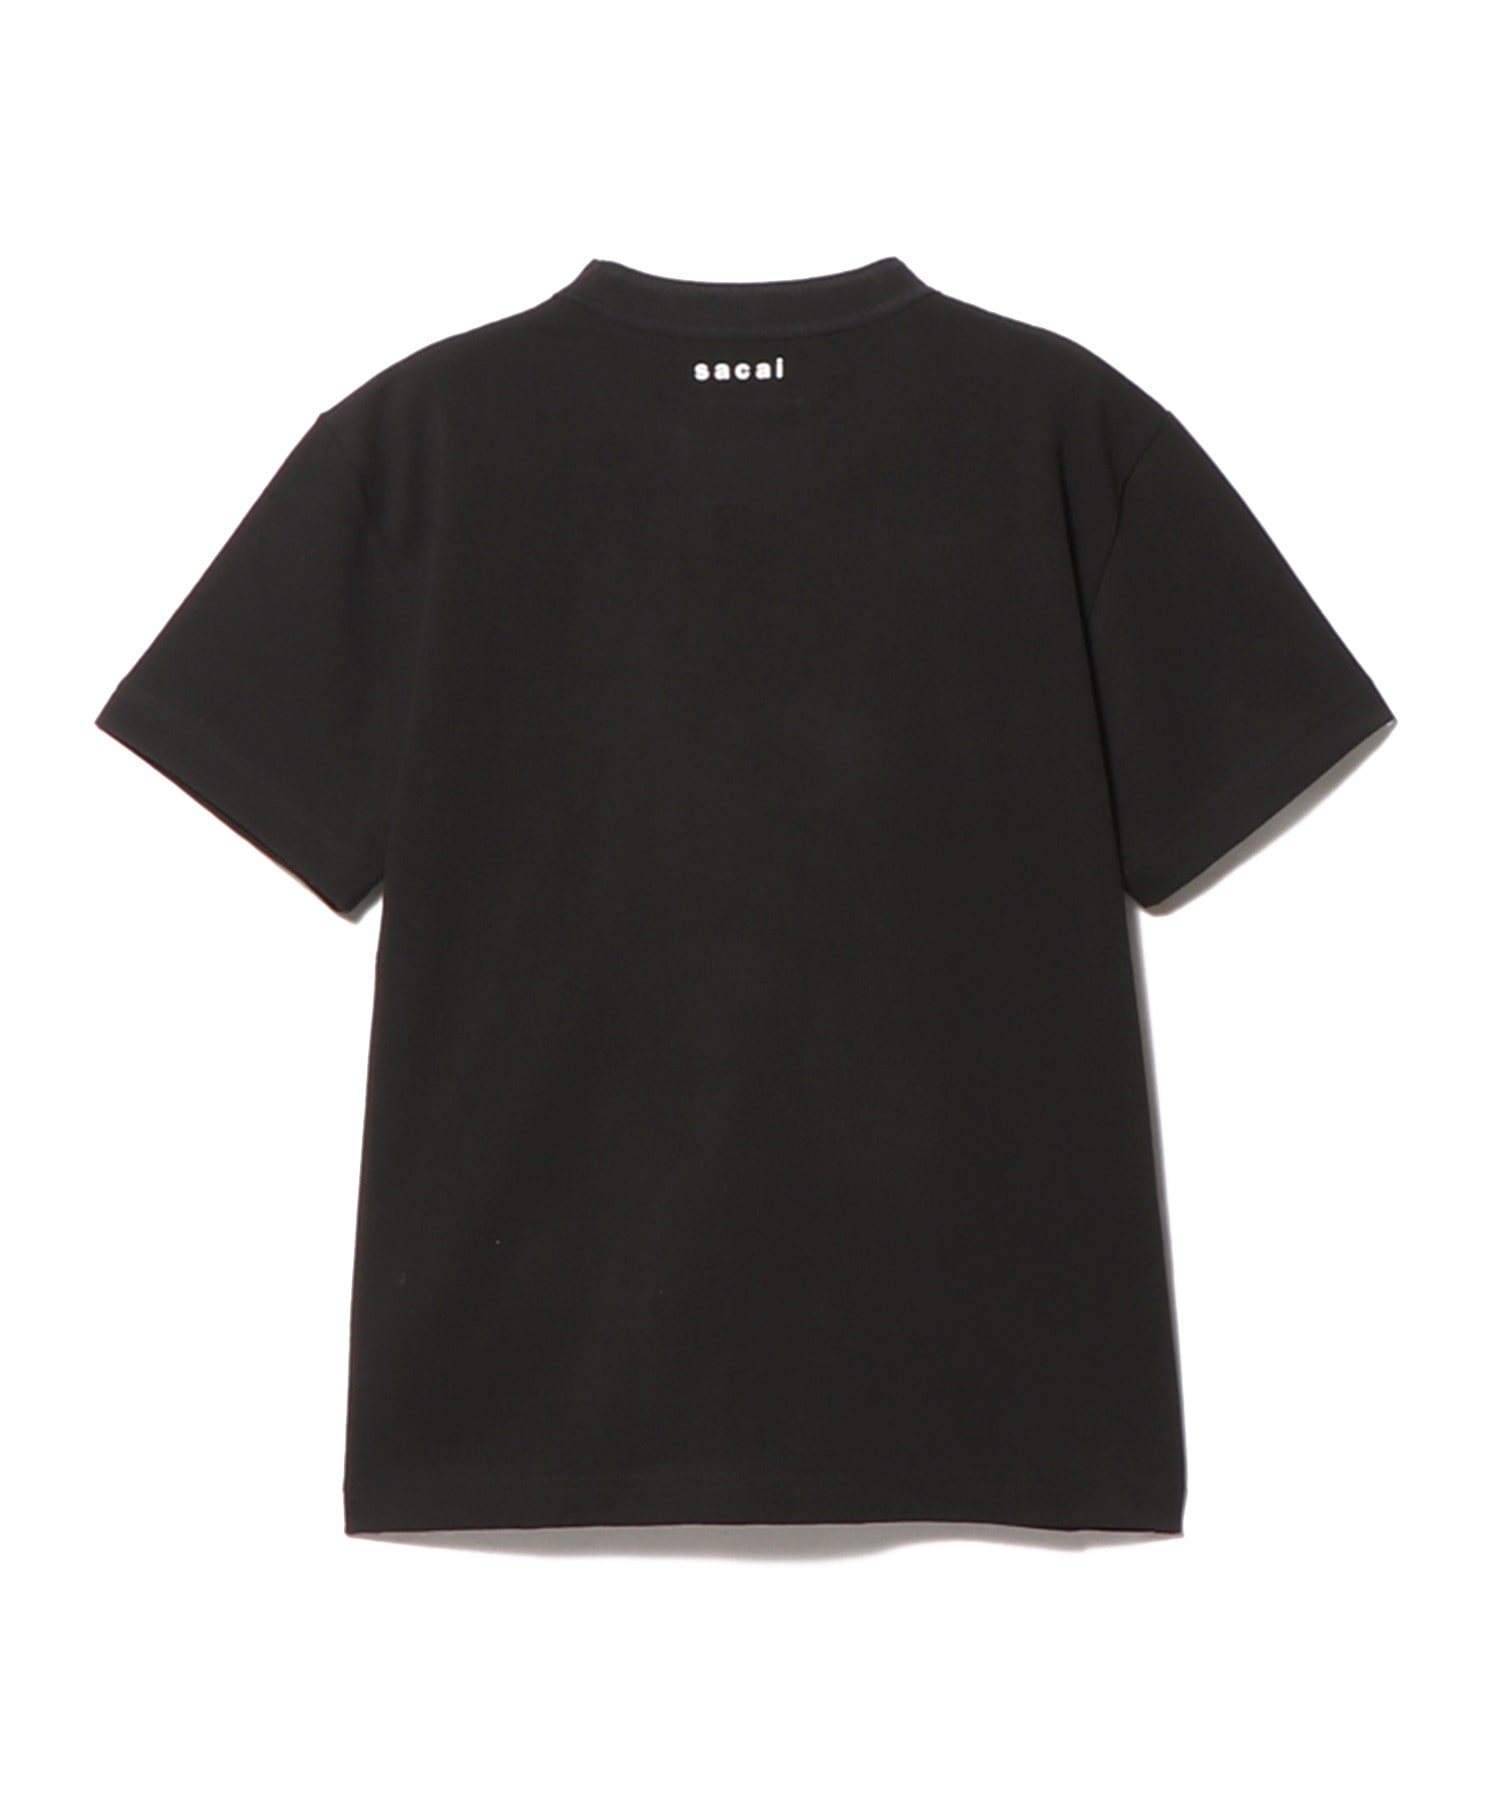 SACAI / EVERYTHING IN ITS RIGHT PLACE クルーネックTシャツ